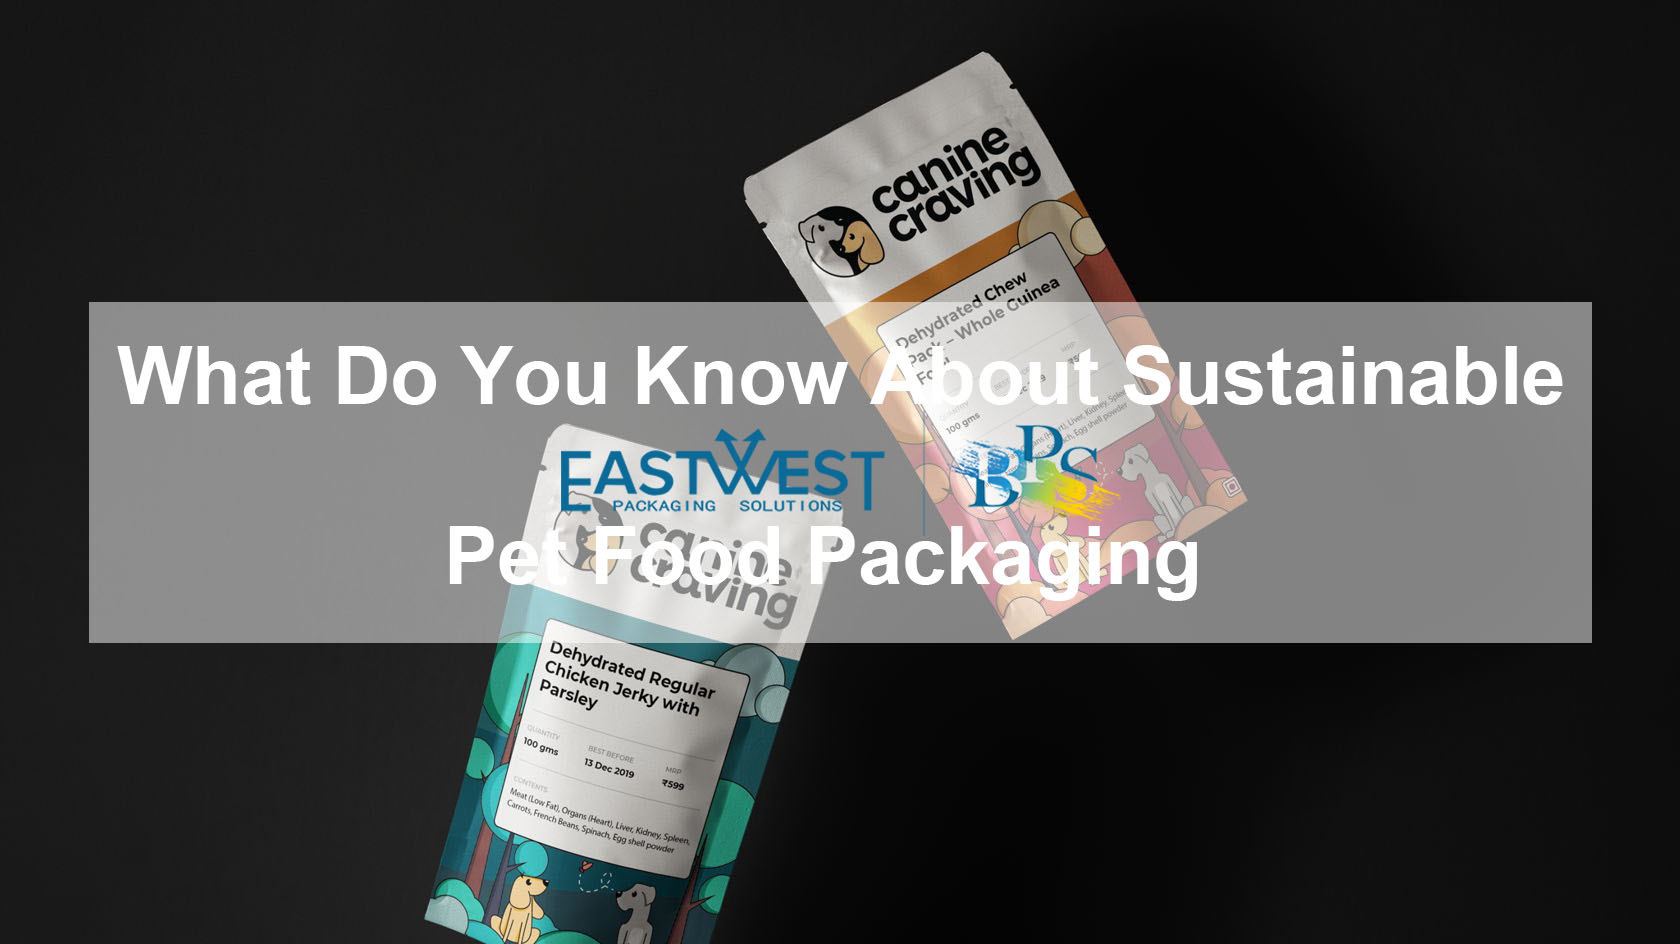 What Do You Know About Sustainable Pet Food Packaging